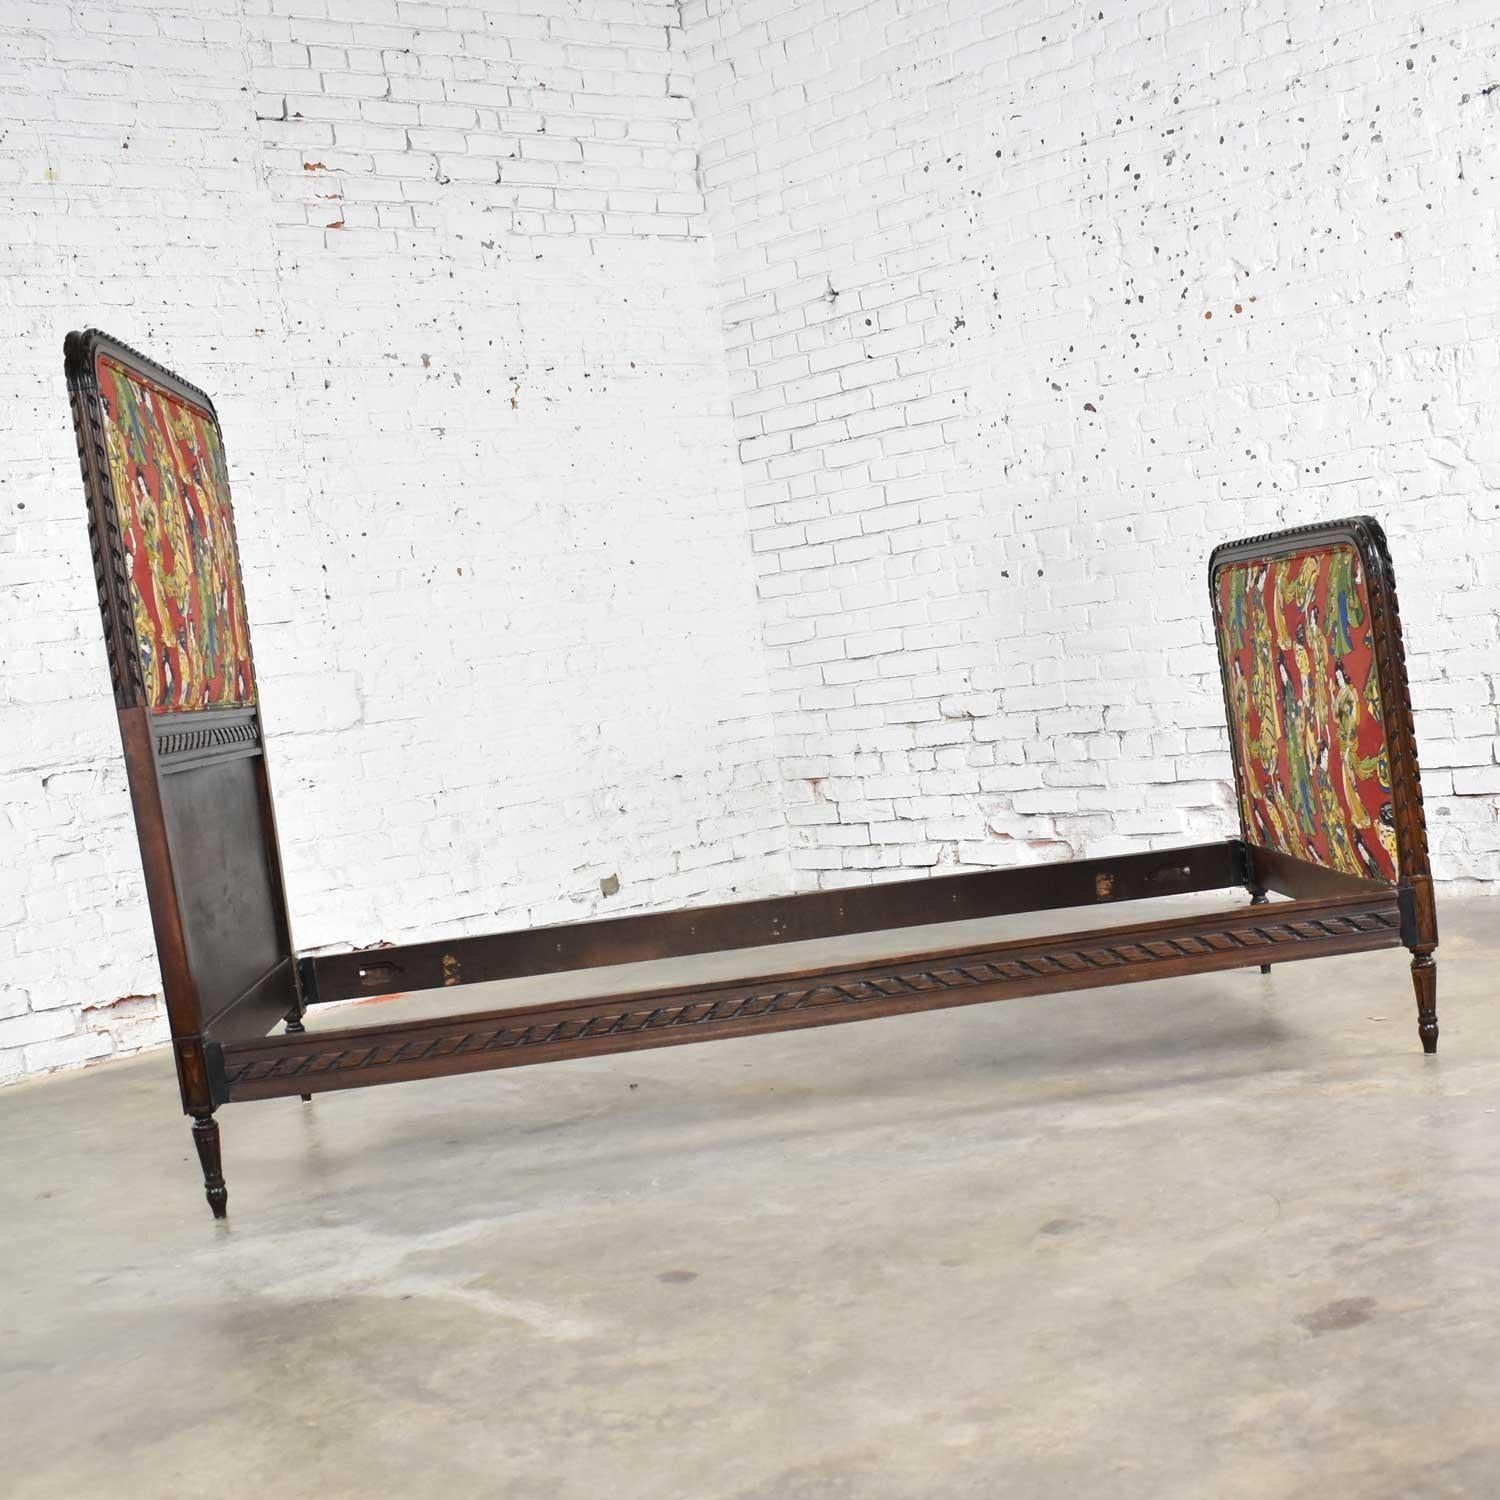 Antique French Carved Walnut and Upholstered Twin Bed with Asian Figural Fabric In Good Condition For Sale In Topeka, KS